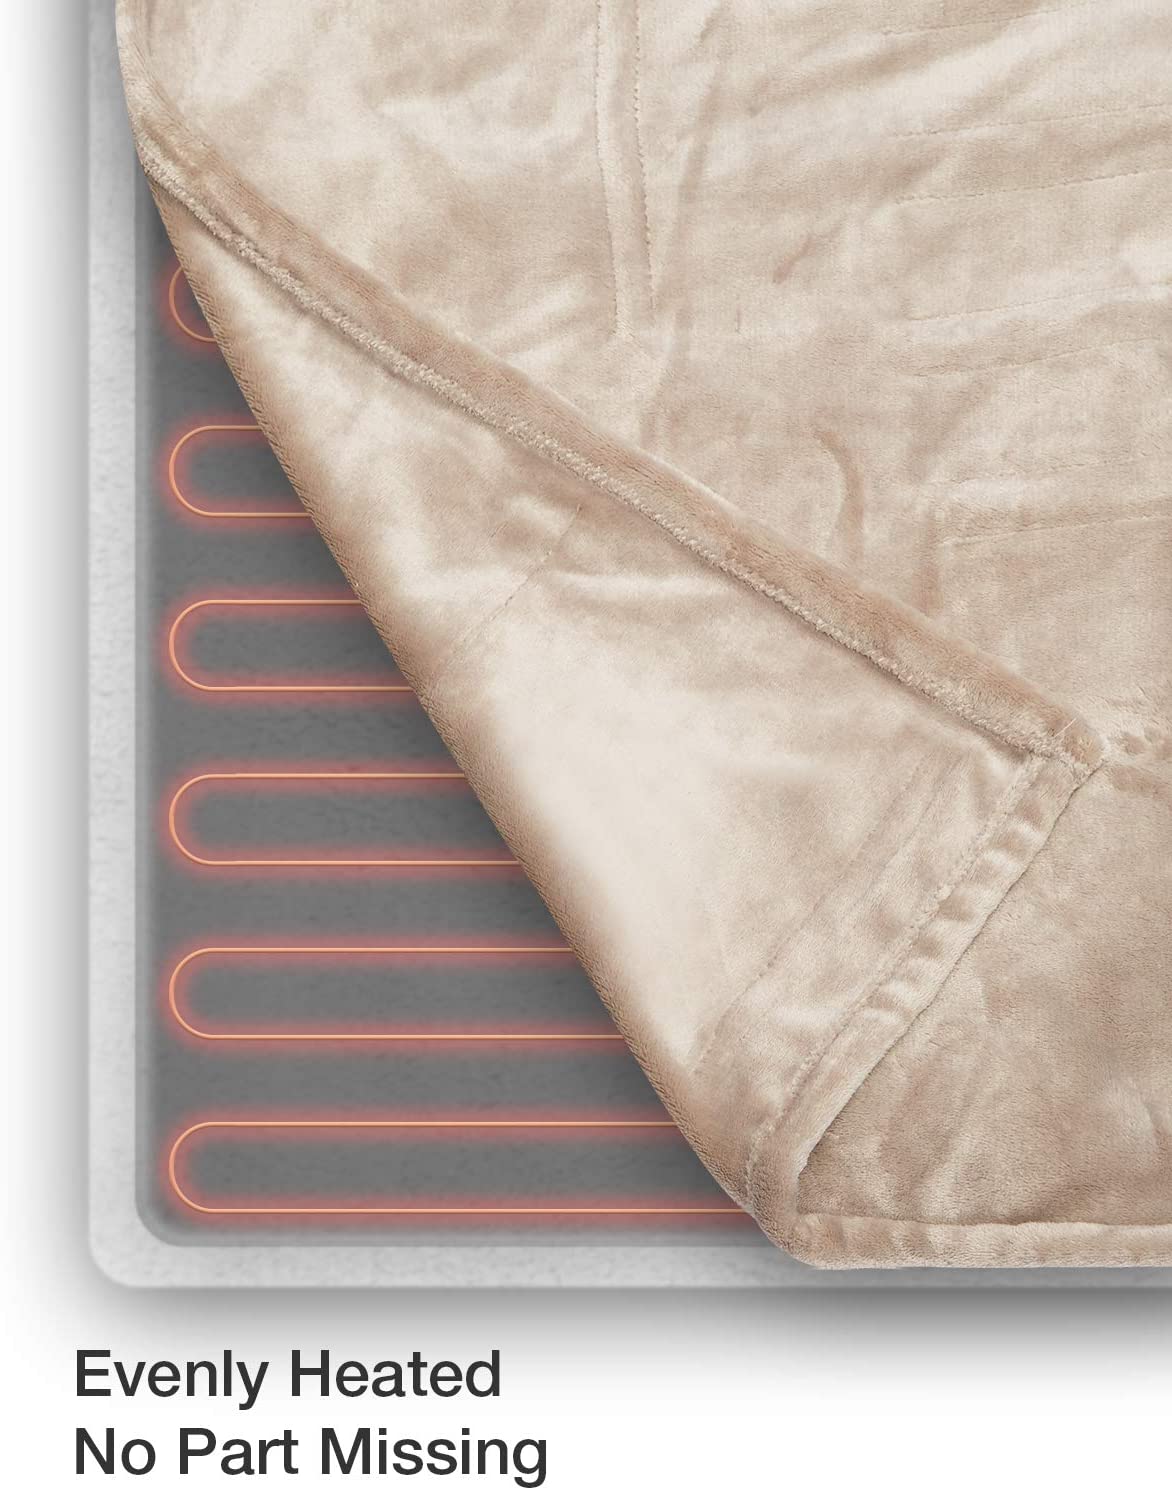 Electric Heating Blanket - Taupe 90"x 100"